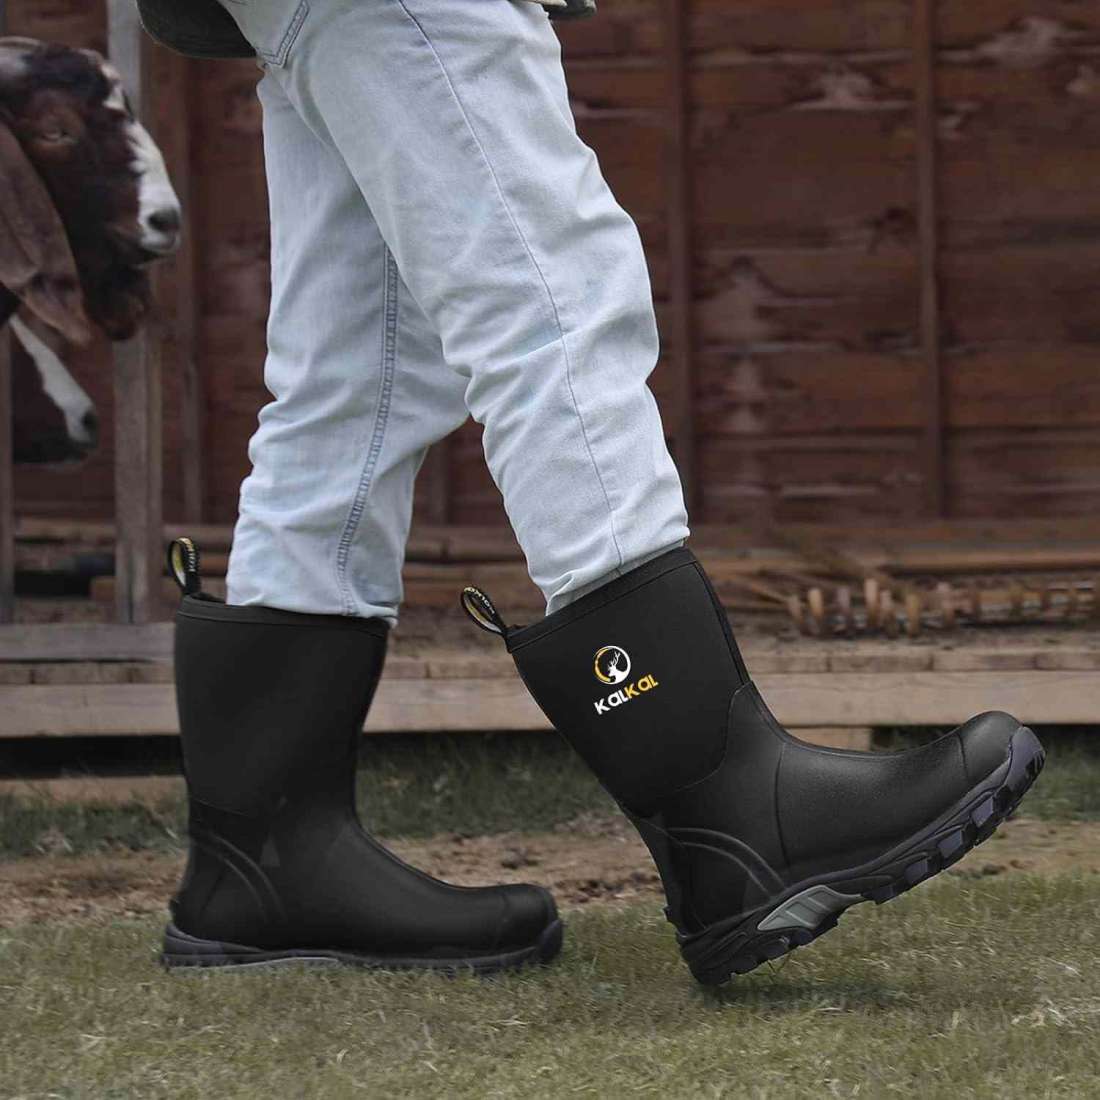 best rubber boots for farm work